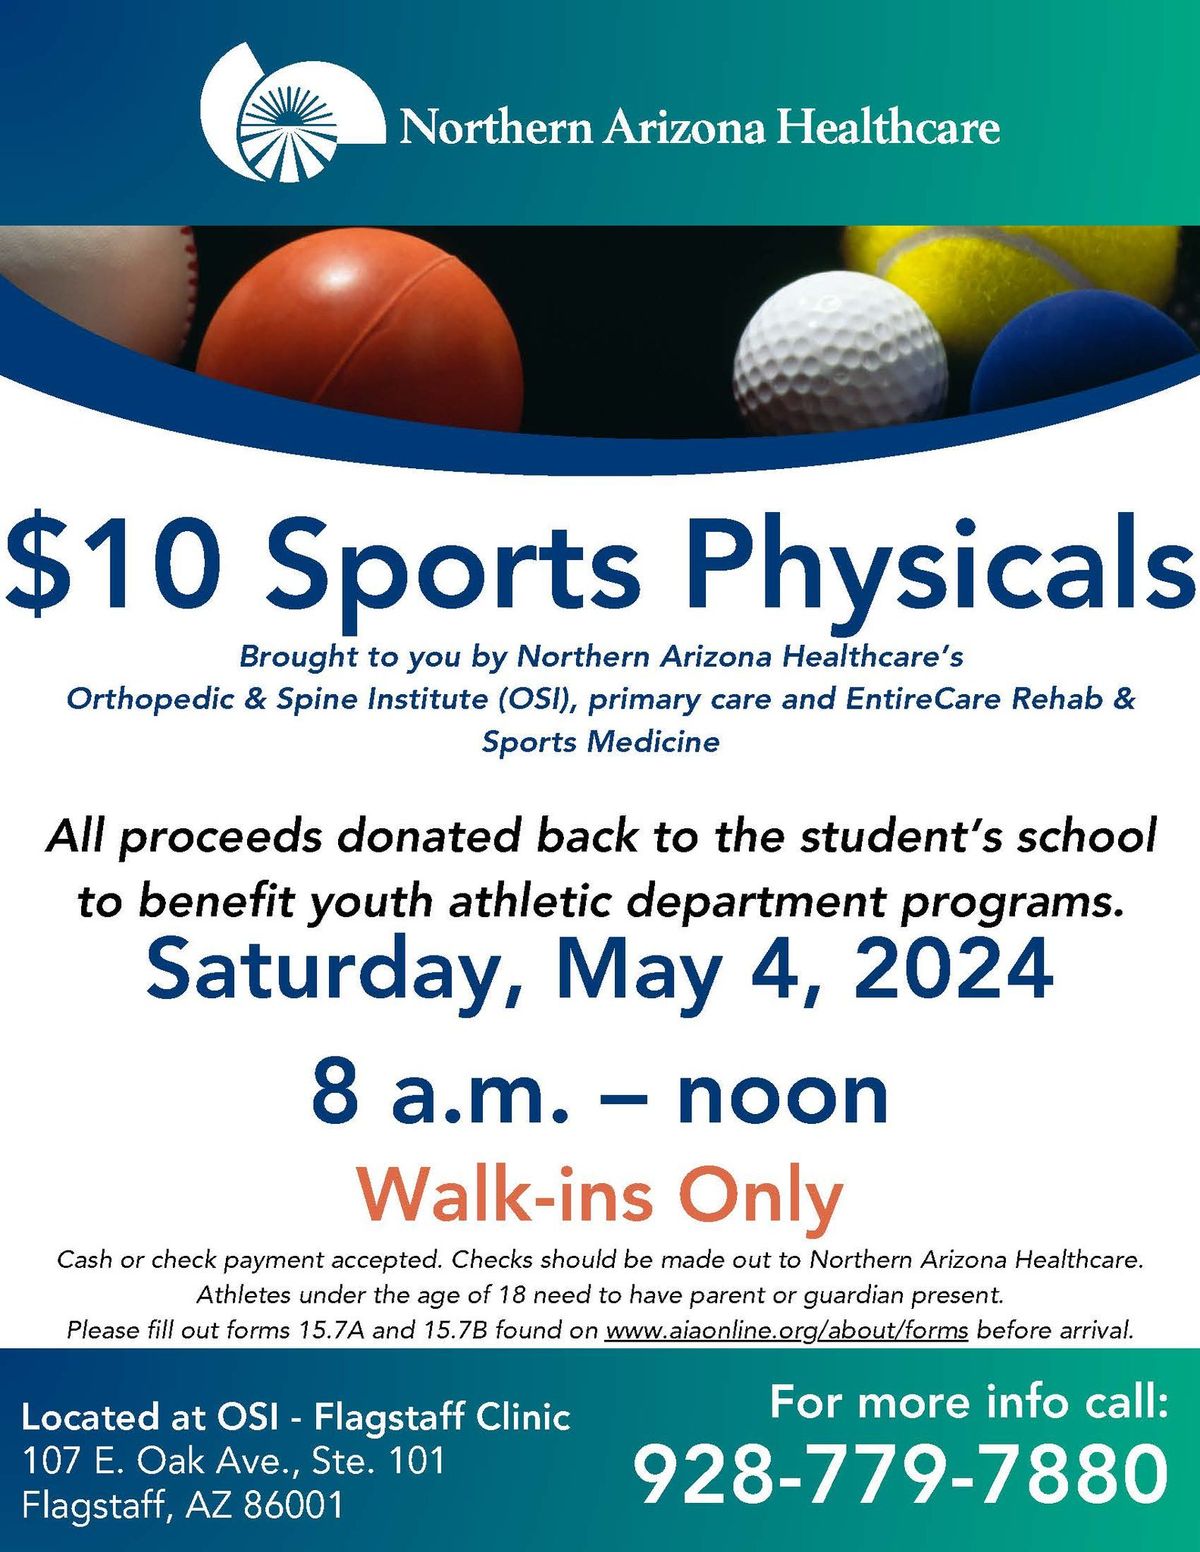 $10 Sports Physicals